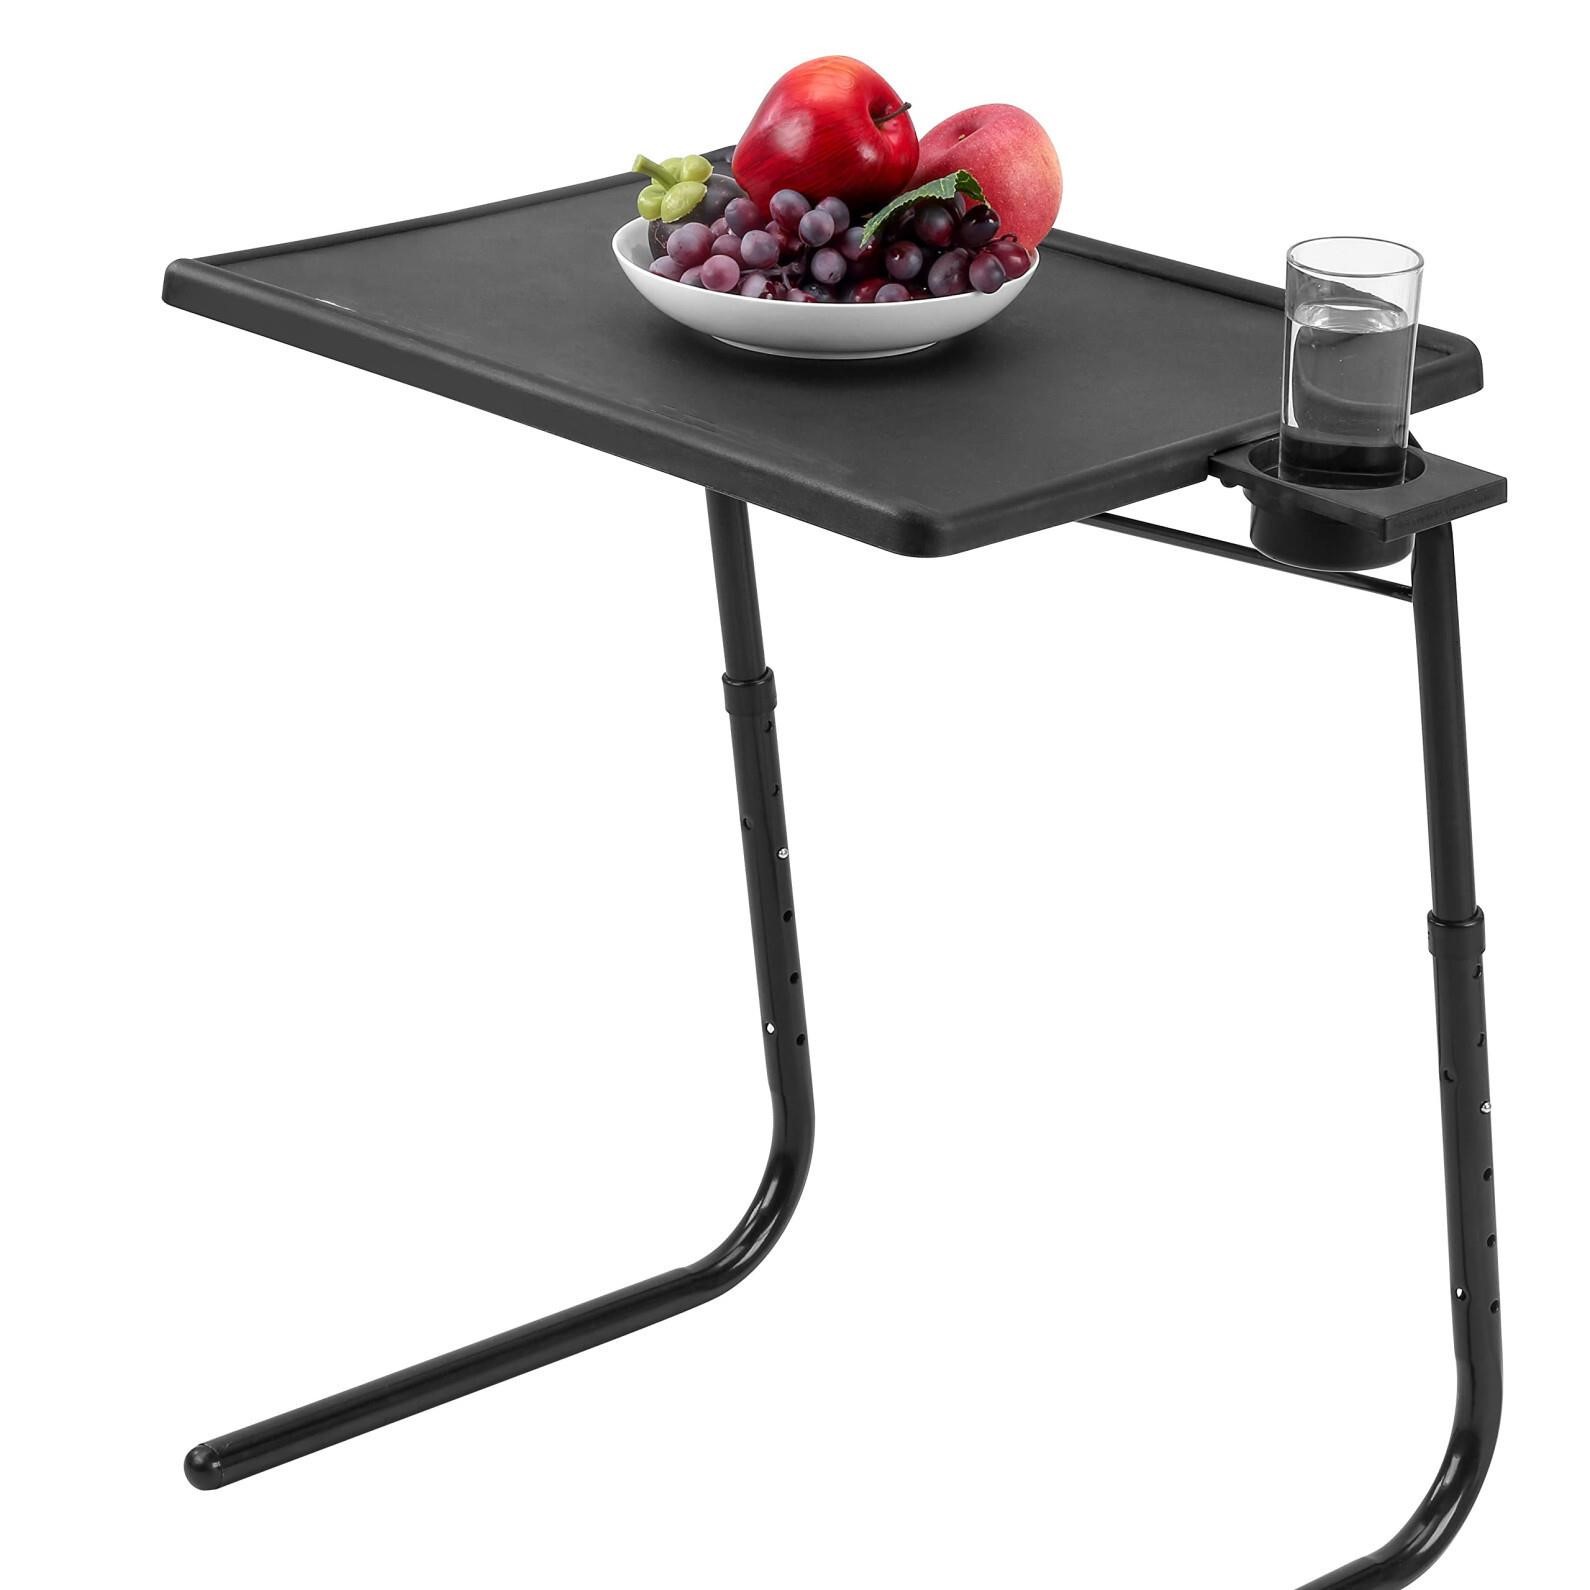 Boidheach TV Tray Stand is an Adjustable Angle Sof